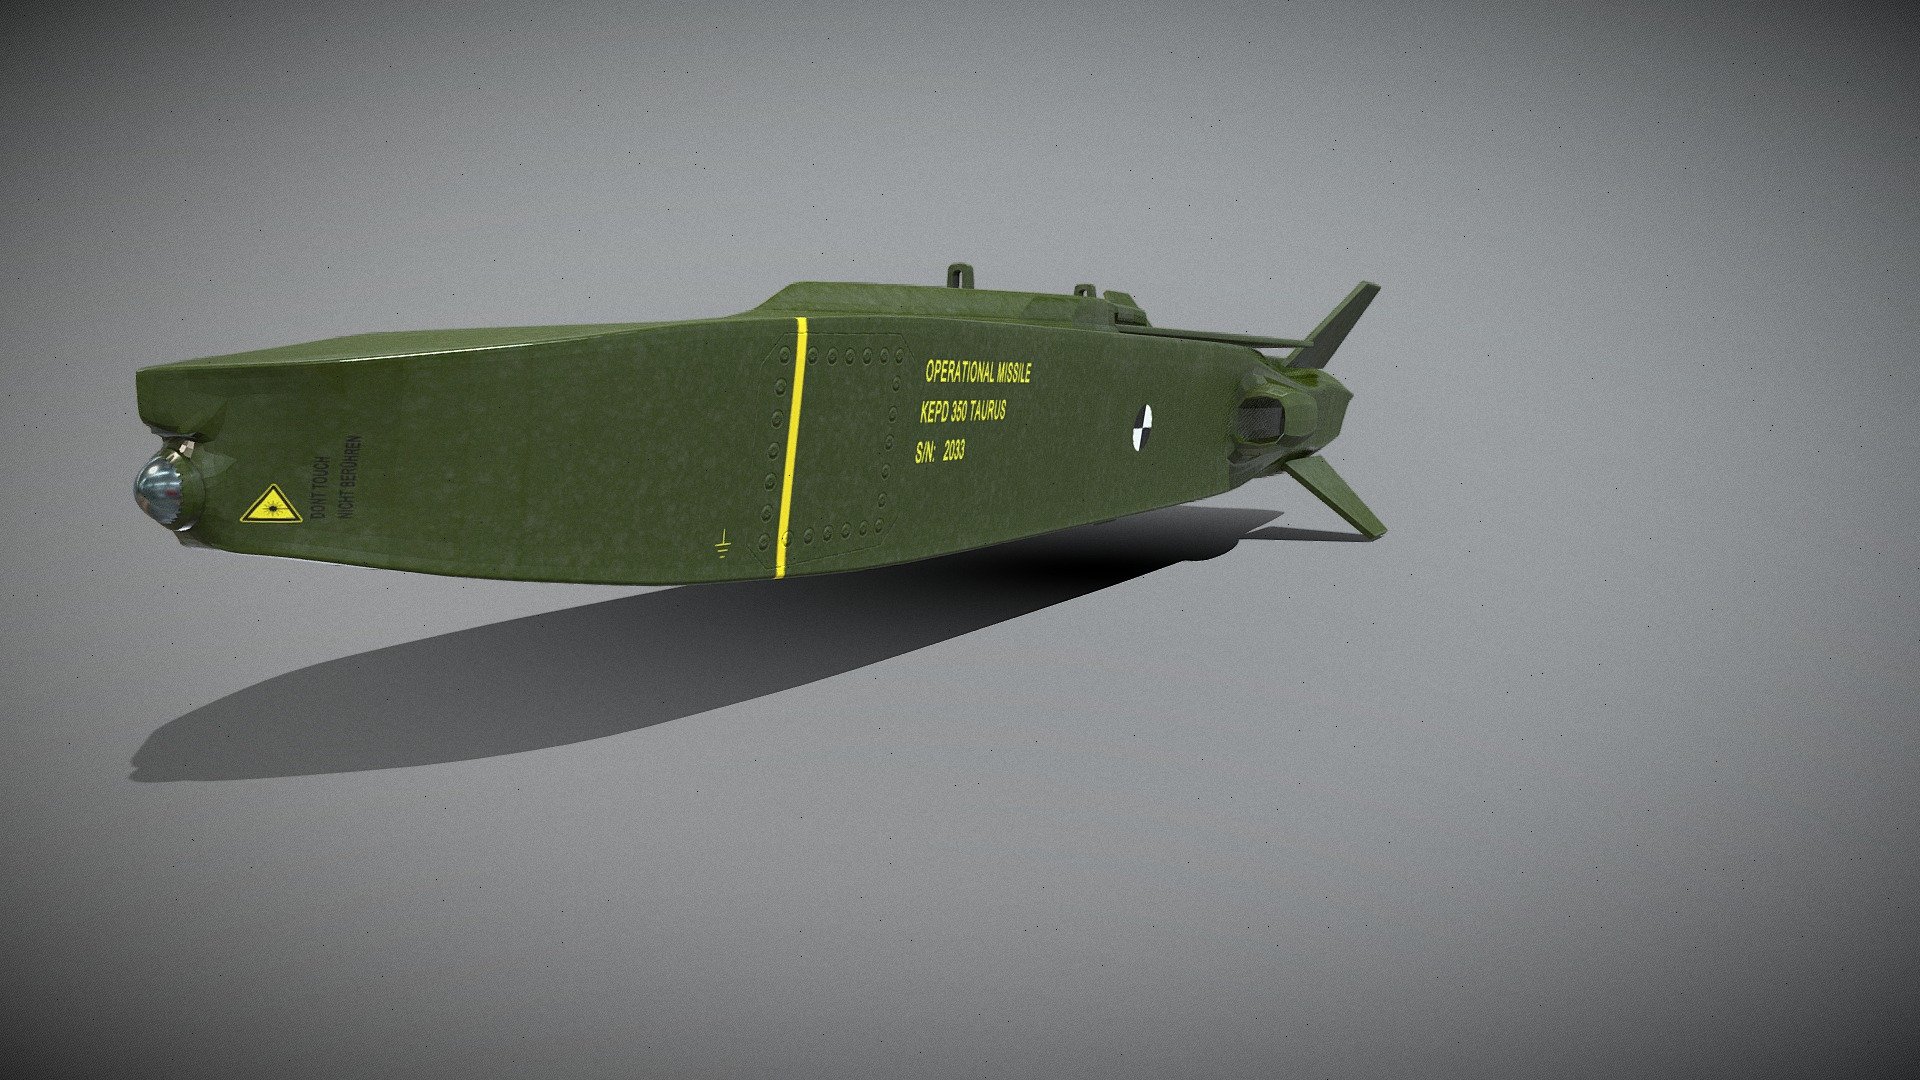 **Taurus KEPD 350 **

air-launched cruise missile

game ready

Range: &gt;500 km
Warhead: Two‐stage tandem MEPHISTO penetrator

I know its not perfect, but im done with it, hope someone likes it - Taurus Cruise Missile KEPD 350 - 3D model by endbored 3d model